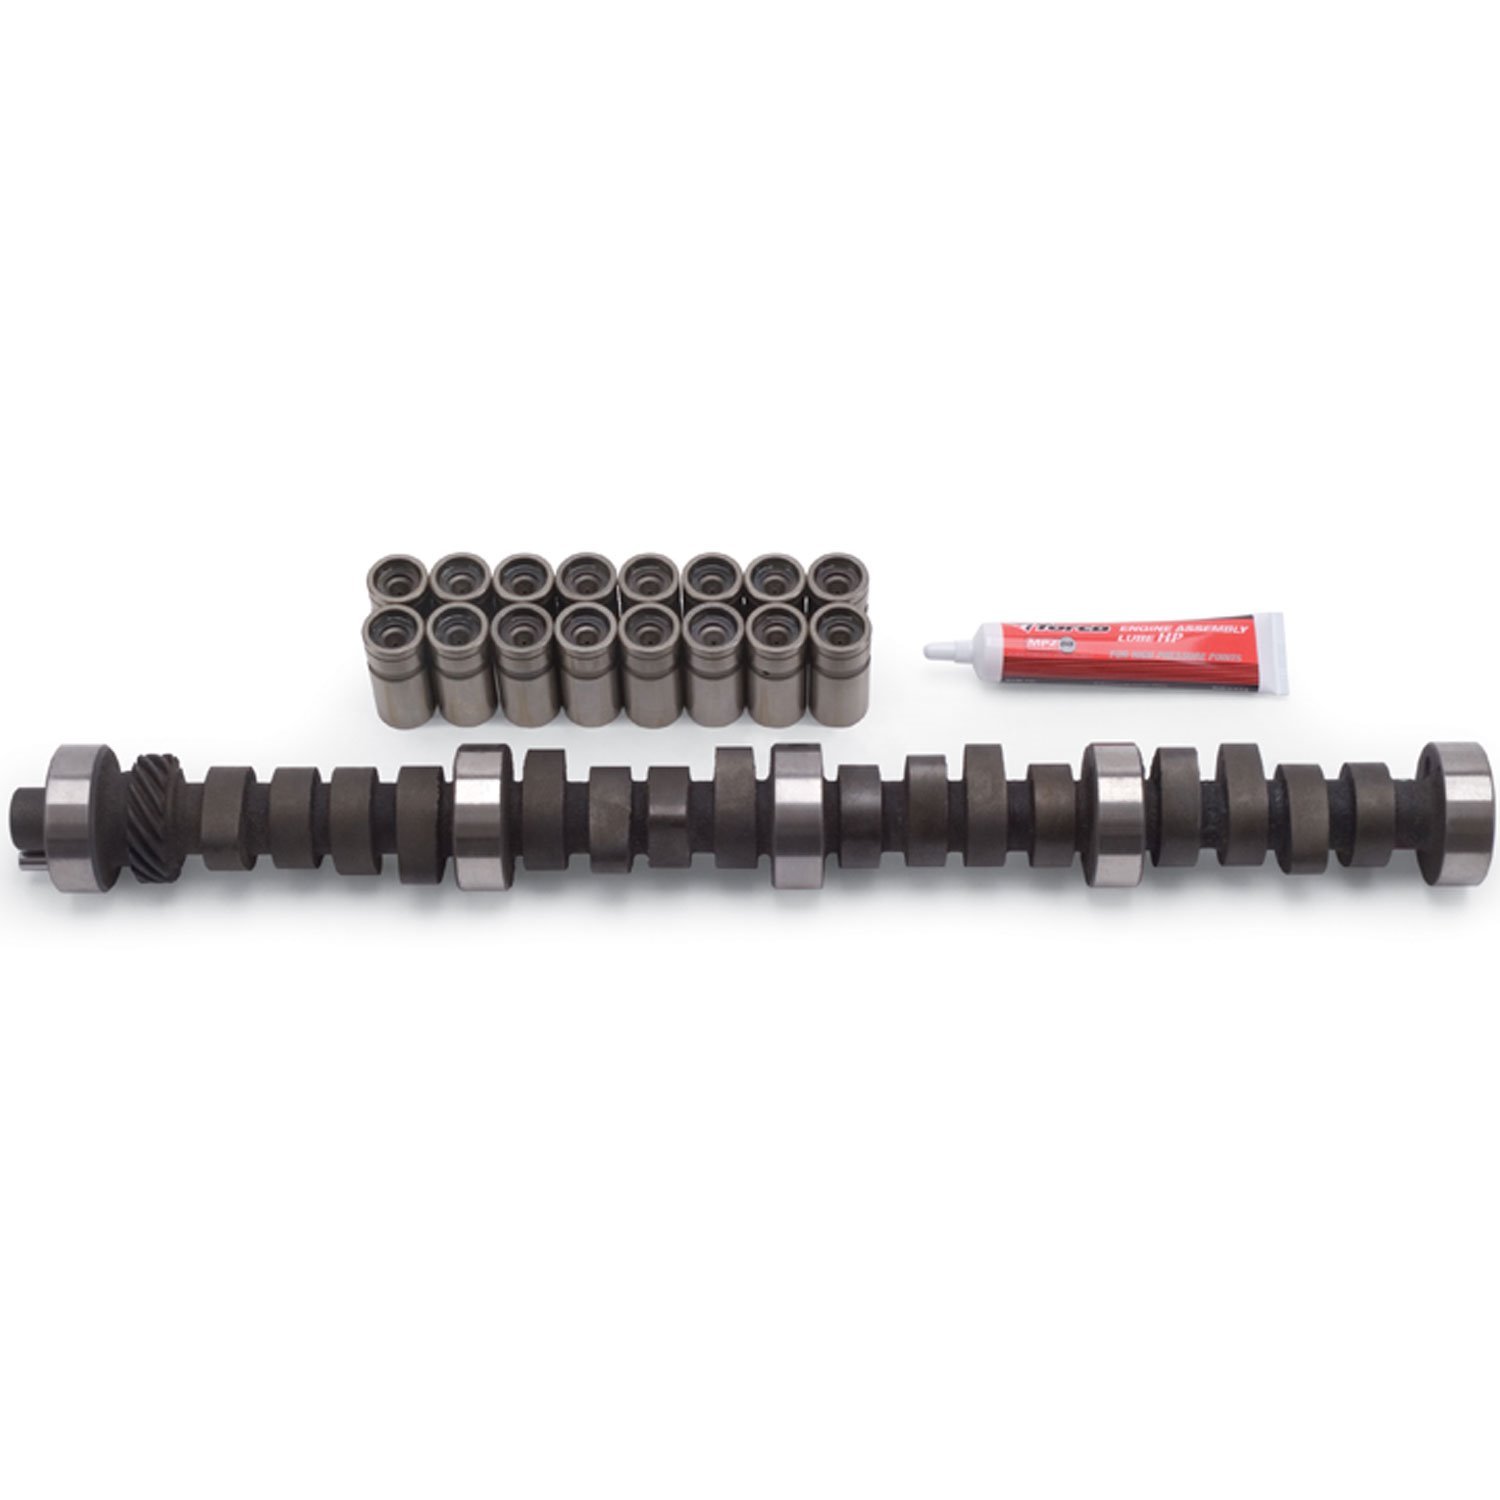 Performer RPM Camshaft Kit for Small Block Ford